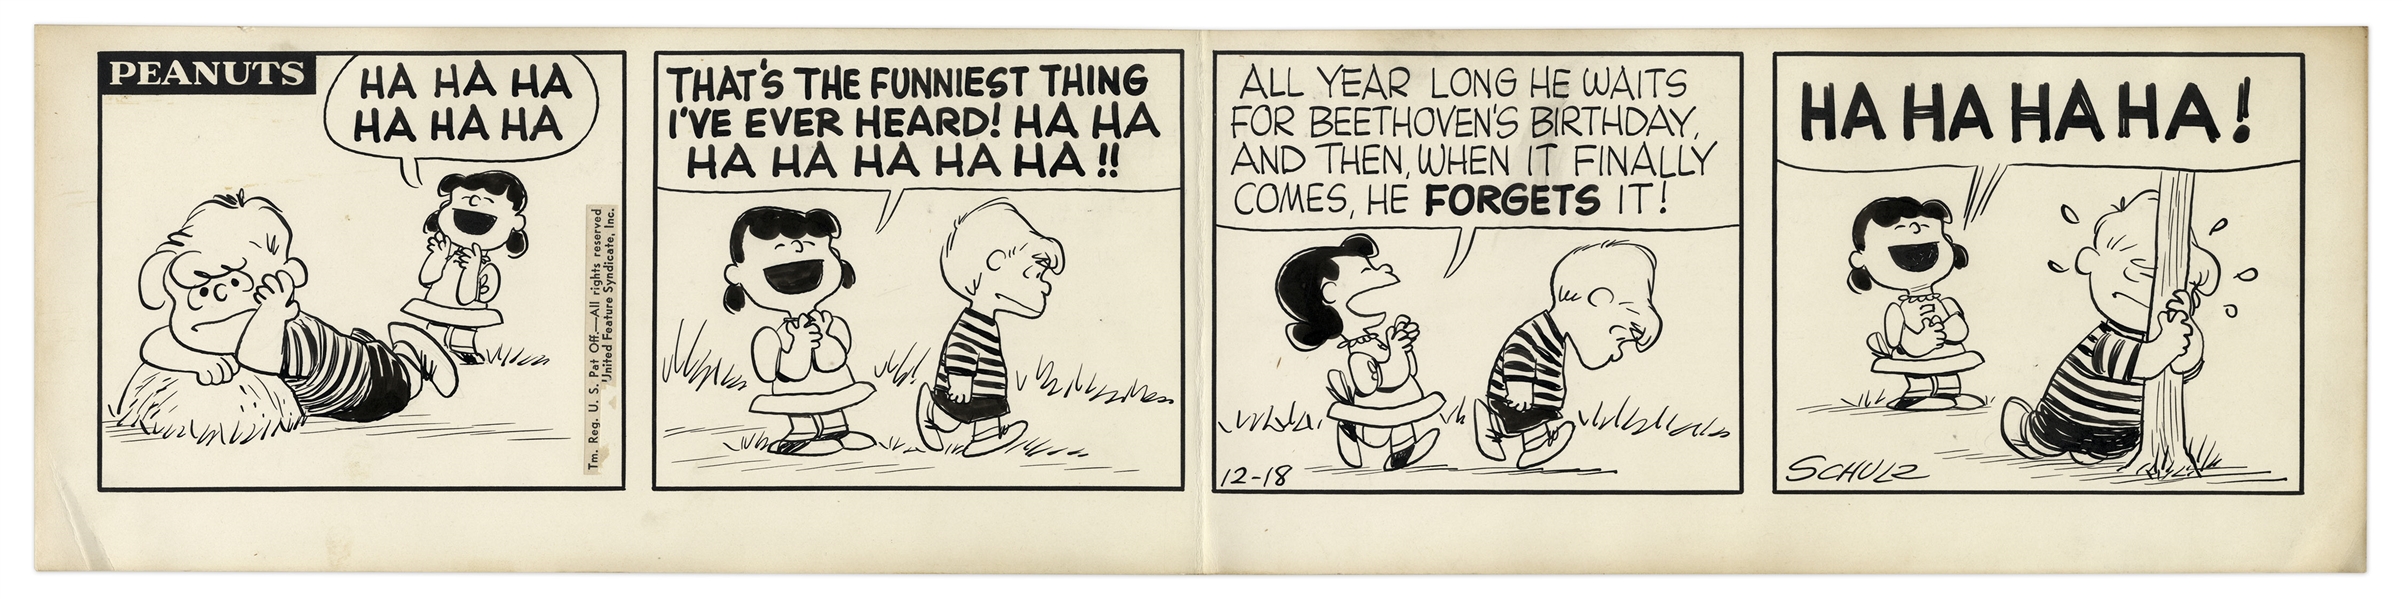 1957 ''Peanuts'' Comic Strip Hand-Drawn by Charles Schulz -- Featuring Lucy & Schroeder